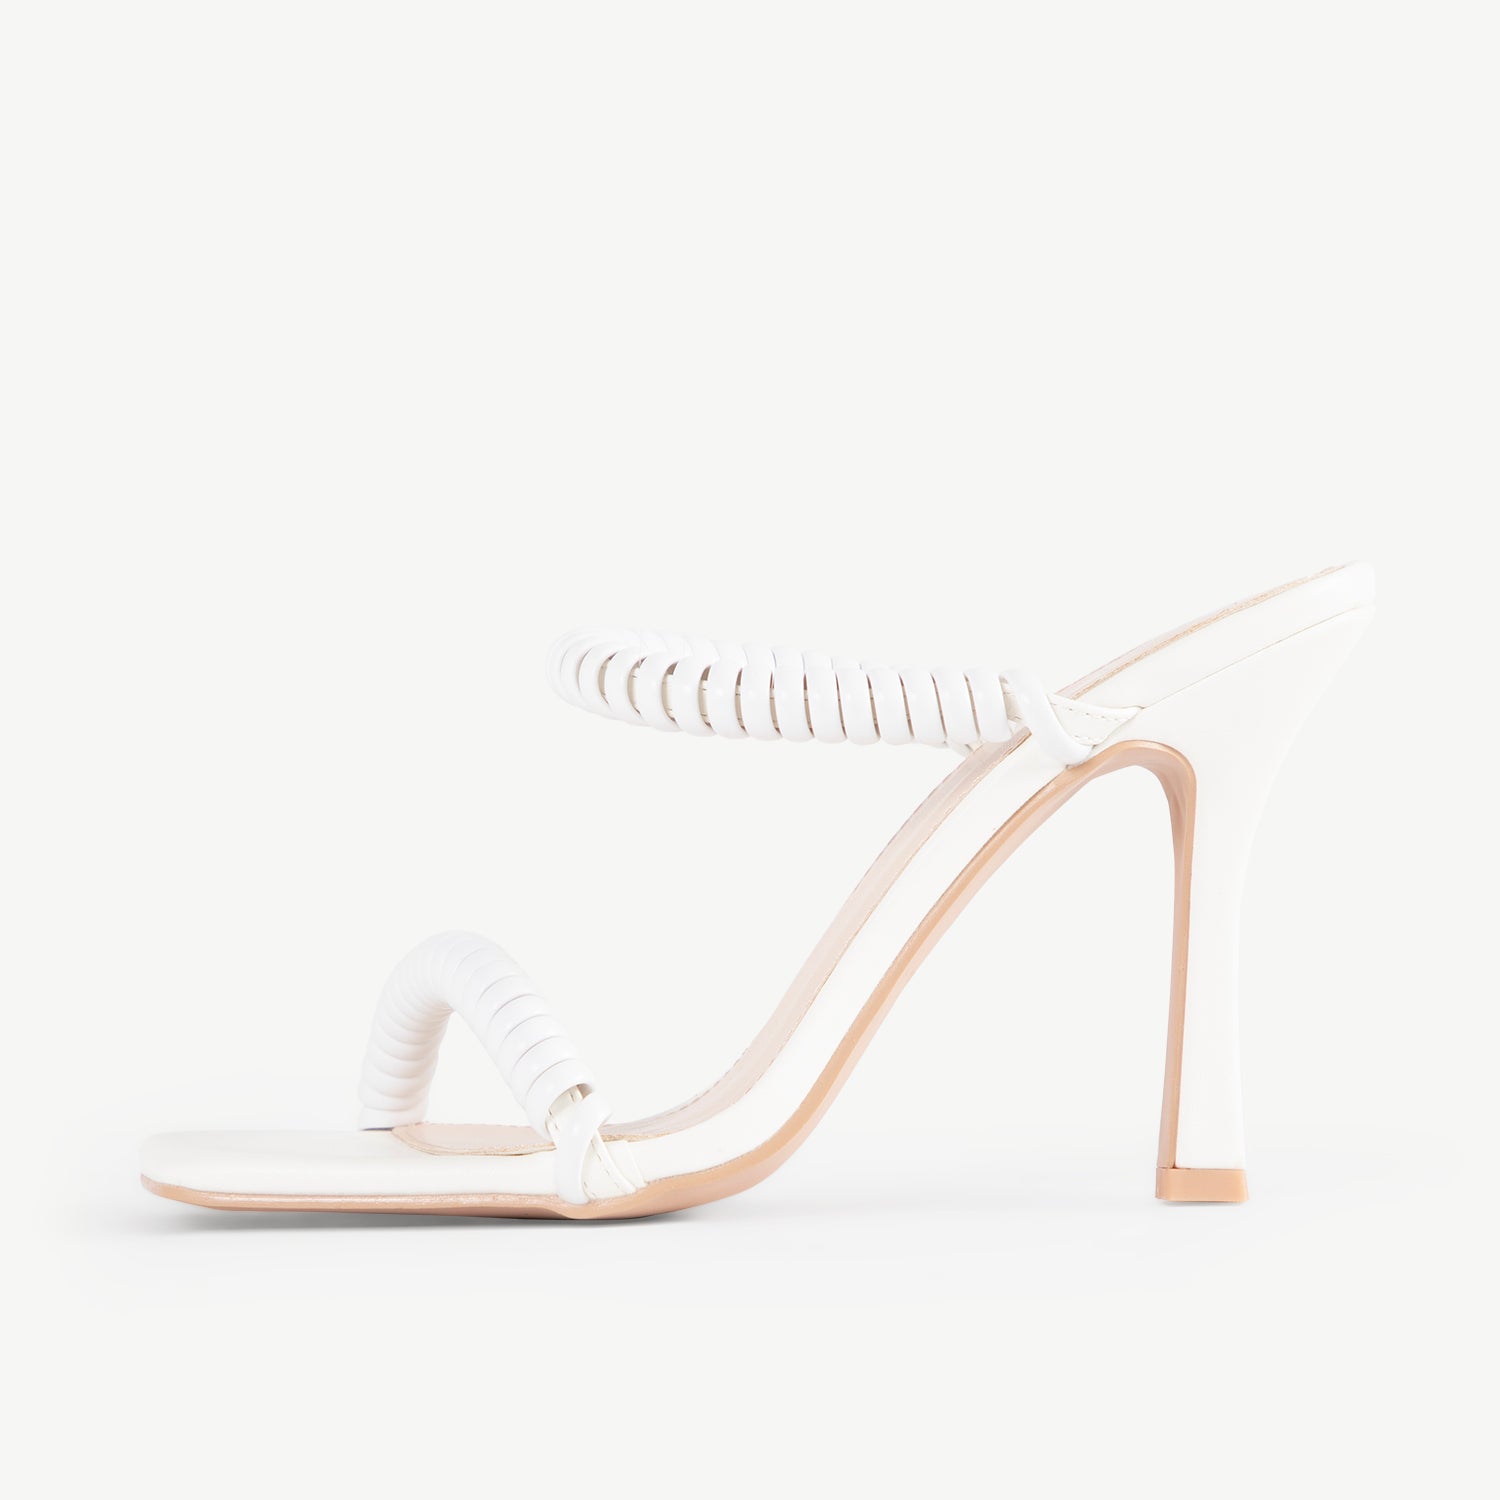 RAID Destined Strappy Heeled Mule in White